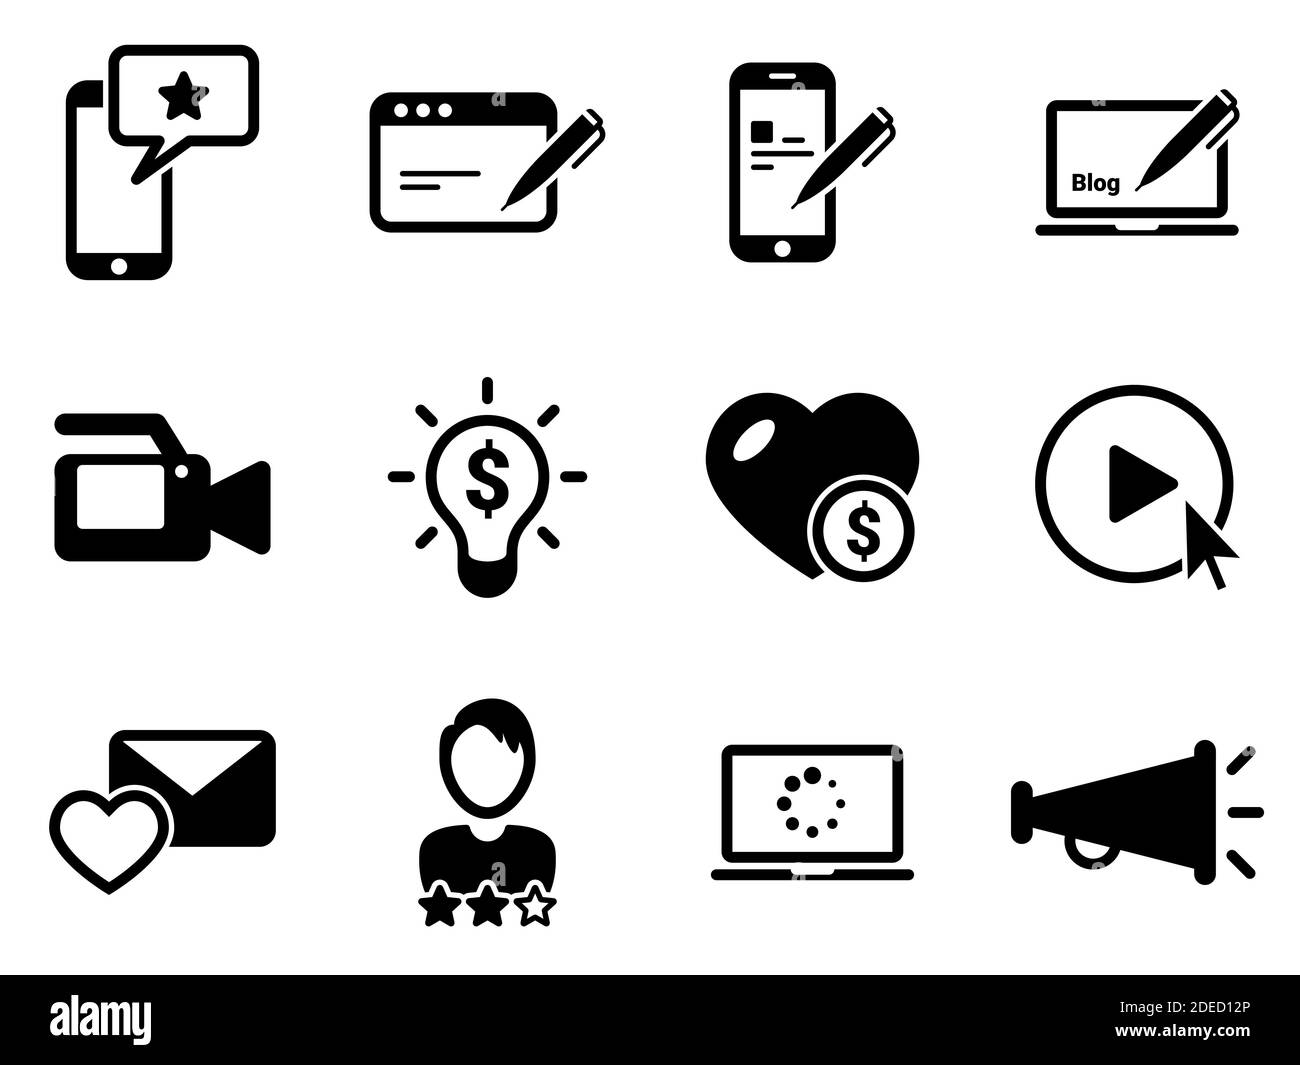 Set of simple icons on a theme Blogger, vector, design, collection, flat, sign, symbol,element, object, illustration, isolated. White background Stock Vector